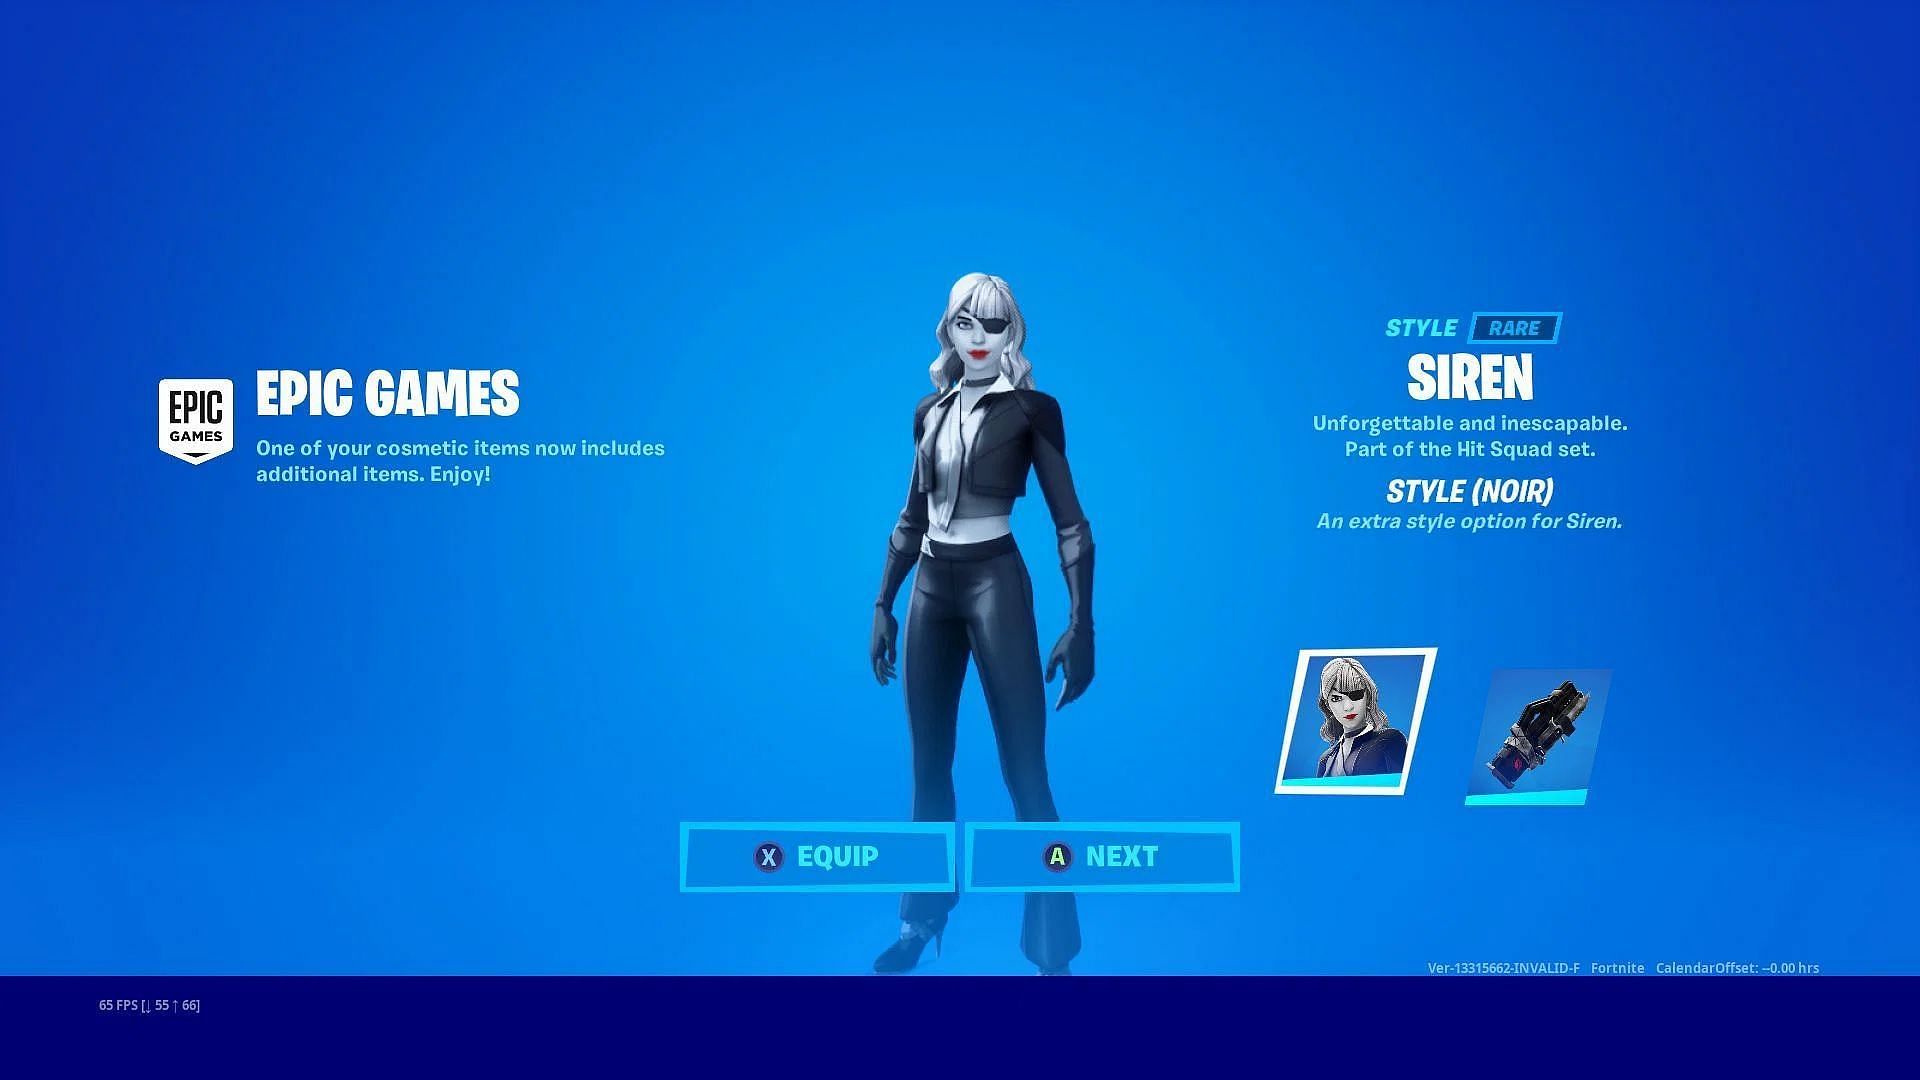 Siren is another popular skin used mostly by sweaty players (Image via Epic Games)